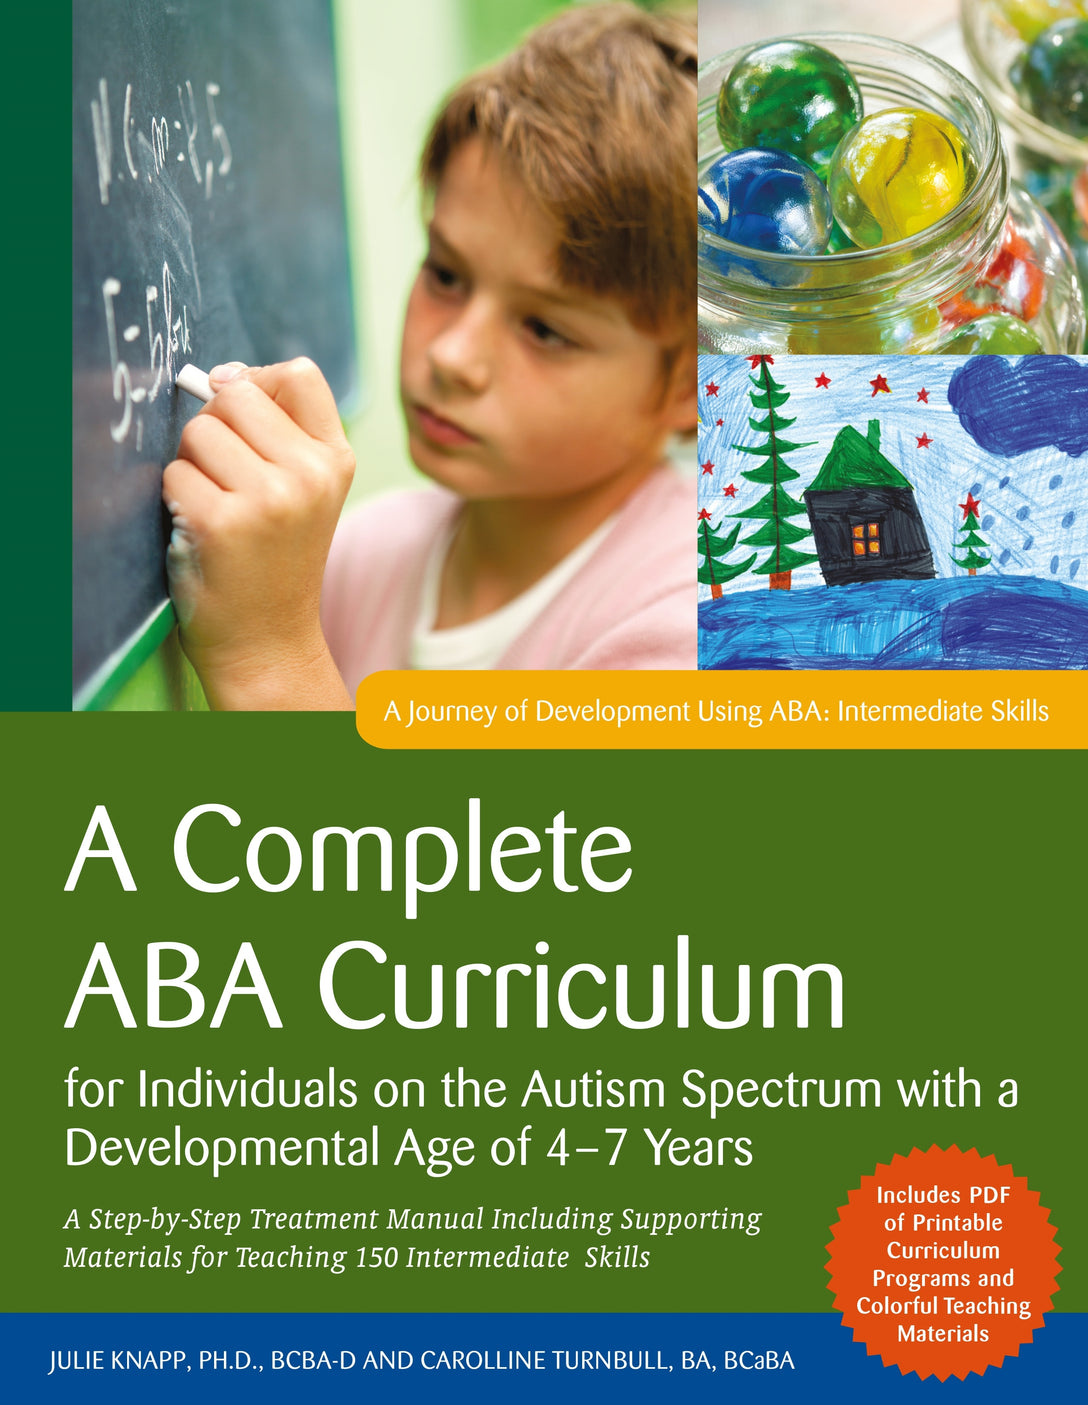 A Complete ABA Curriculum for Individuals on the Autism Spectrum with a Developmental Age of 4-7 Years by Carolline Turnbull, Julie Knapp